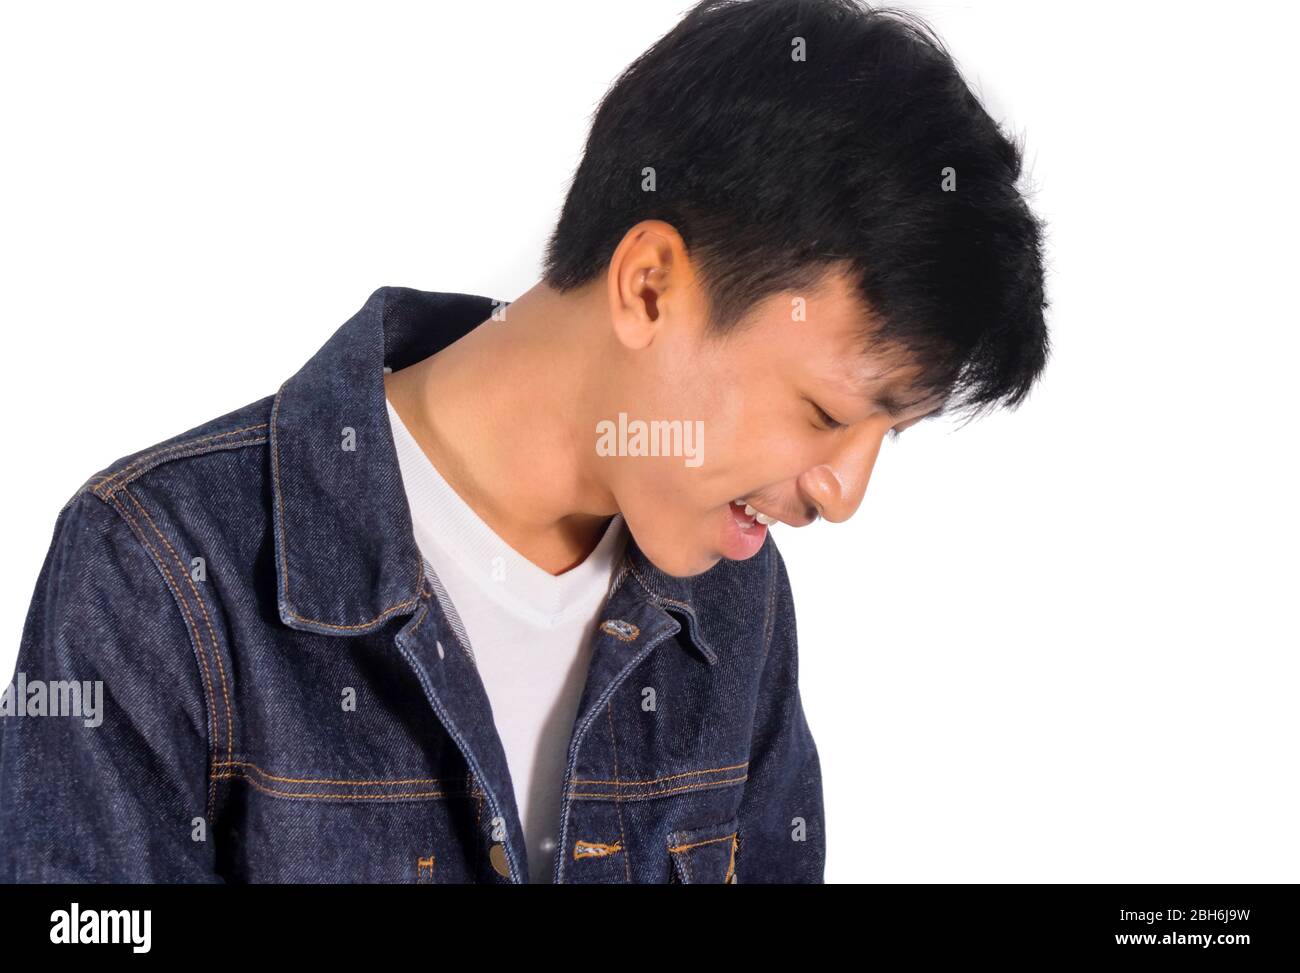 An Asian man is looking down to the floor close up white background. Stock Photo